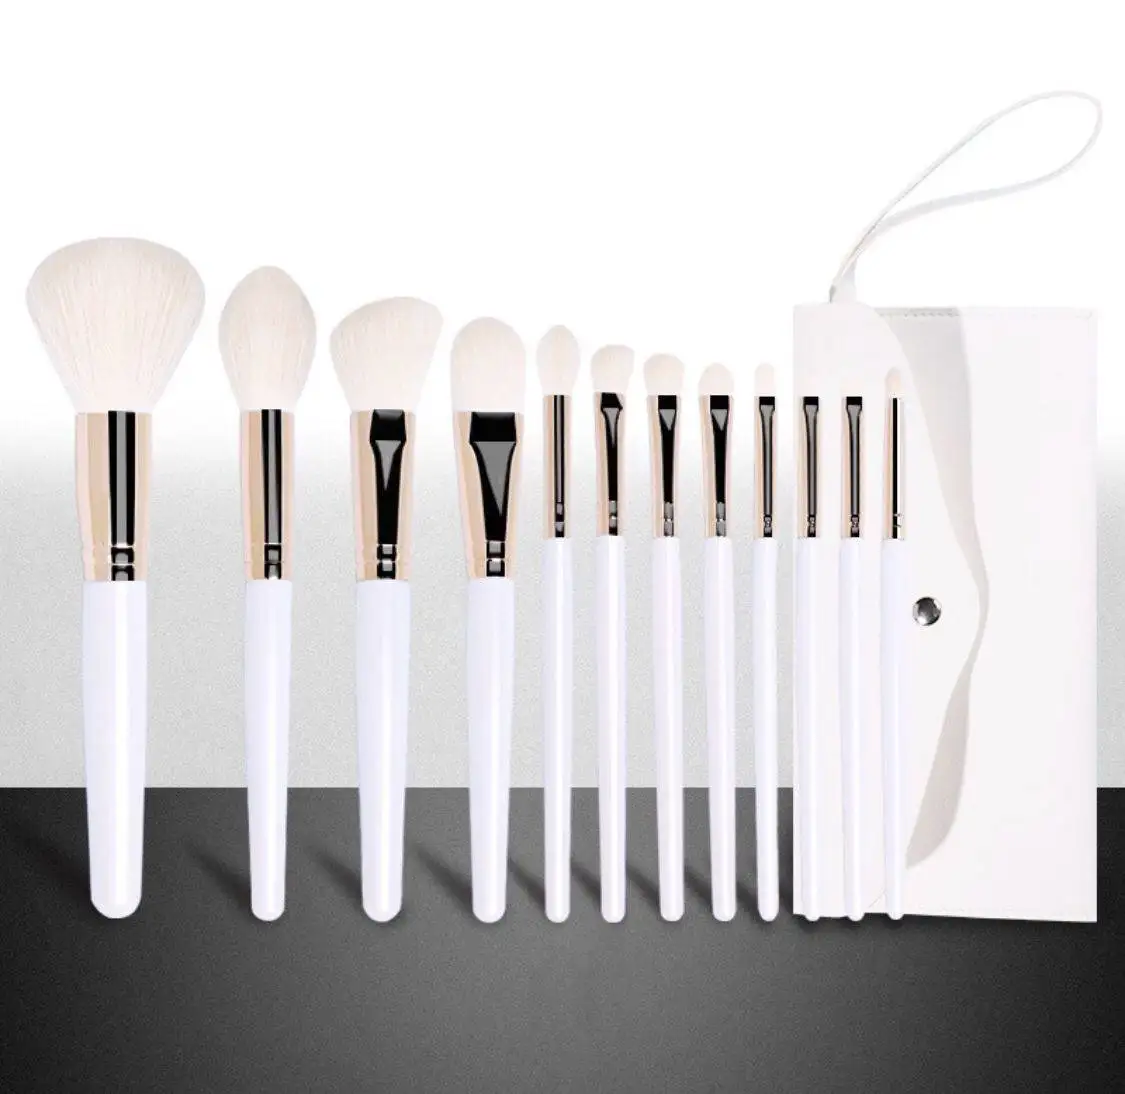 

12pcs white makeup brush set with high quality synthetic hair vegan makeup brush set synthetic hair brushes makeup sets